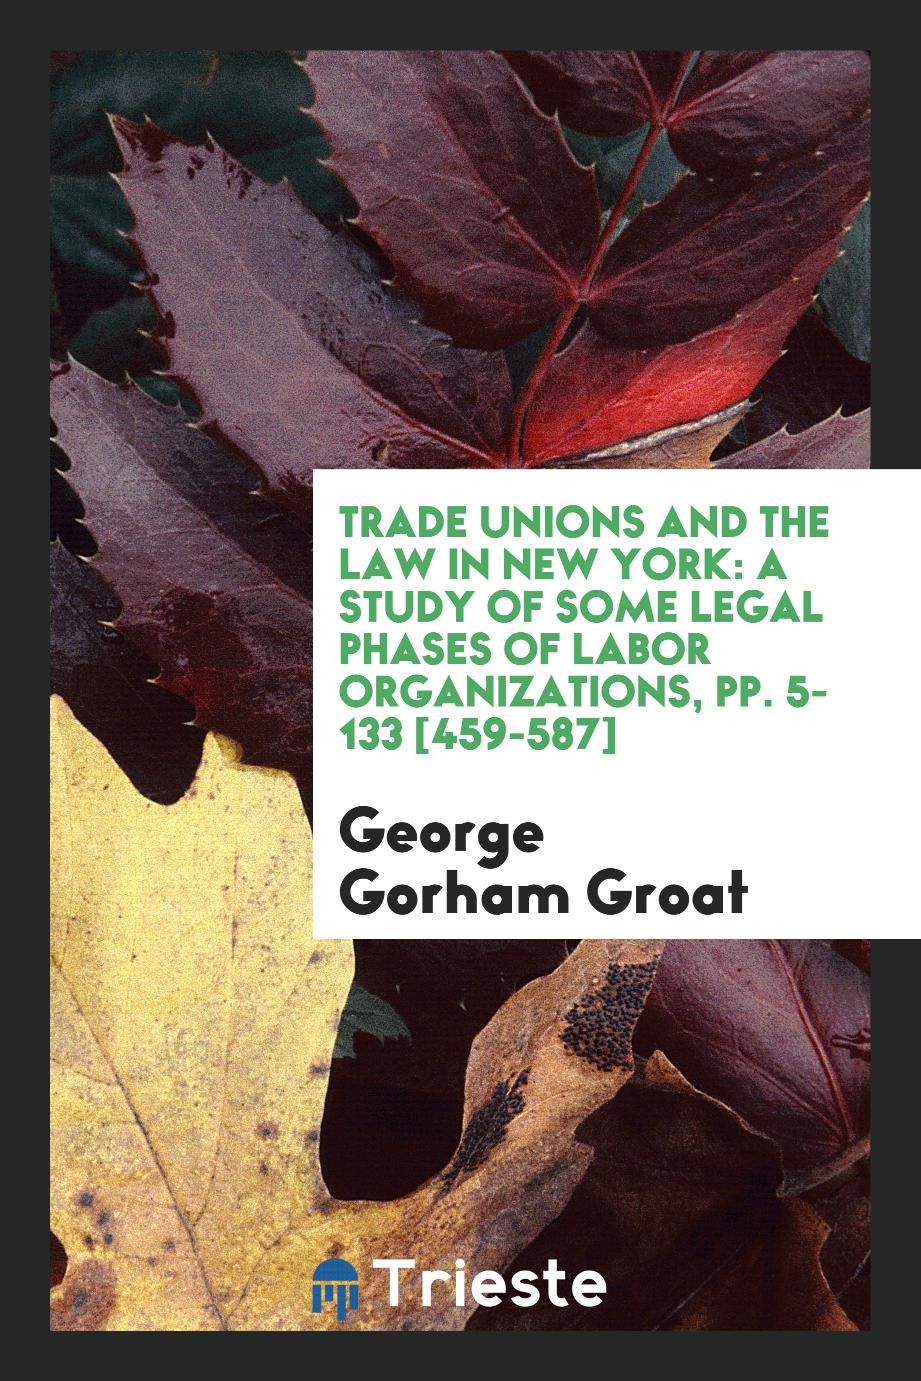 Trade Unions and the Law in New York: A Study of Some Legal Phases of Labor Organizations, pp. 5-133 [459-587]